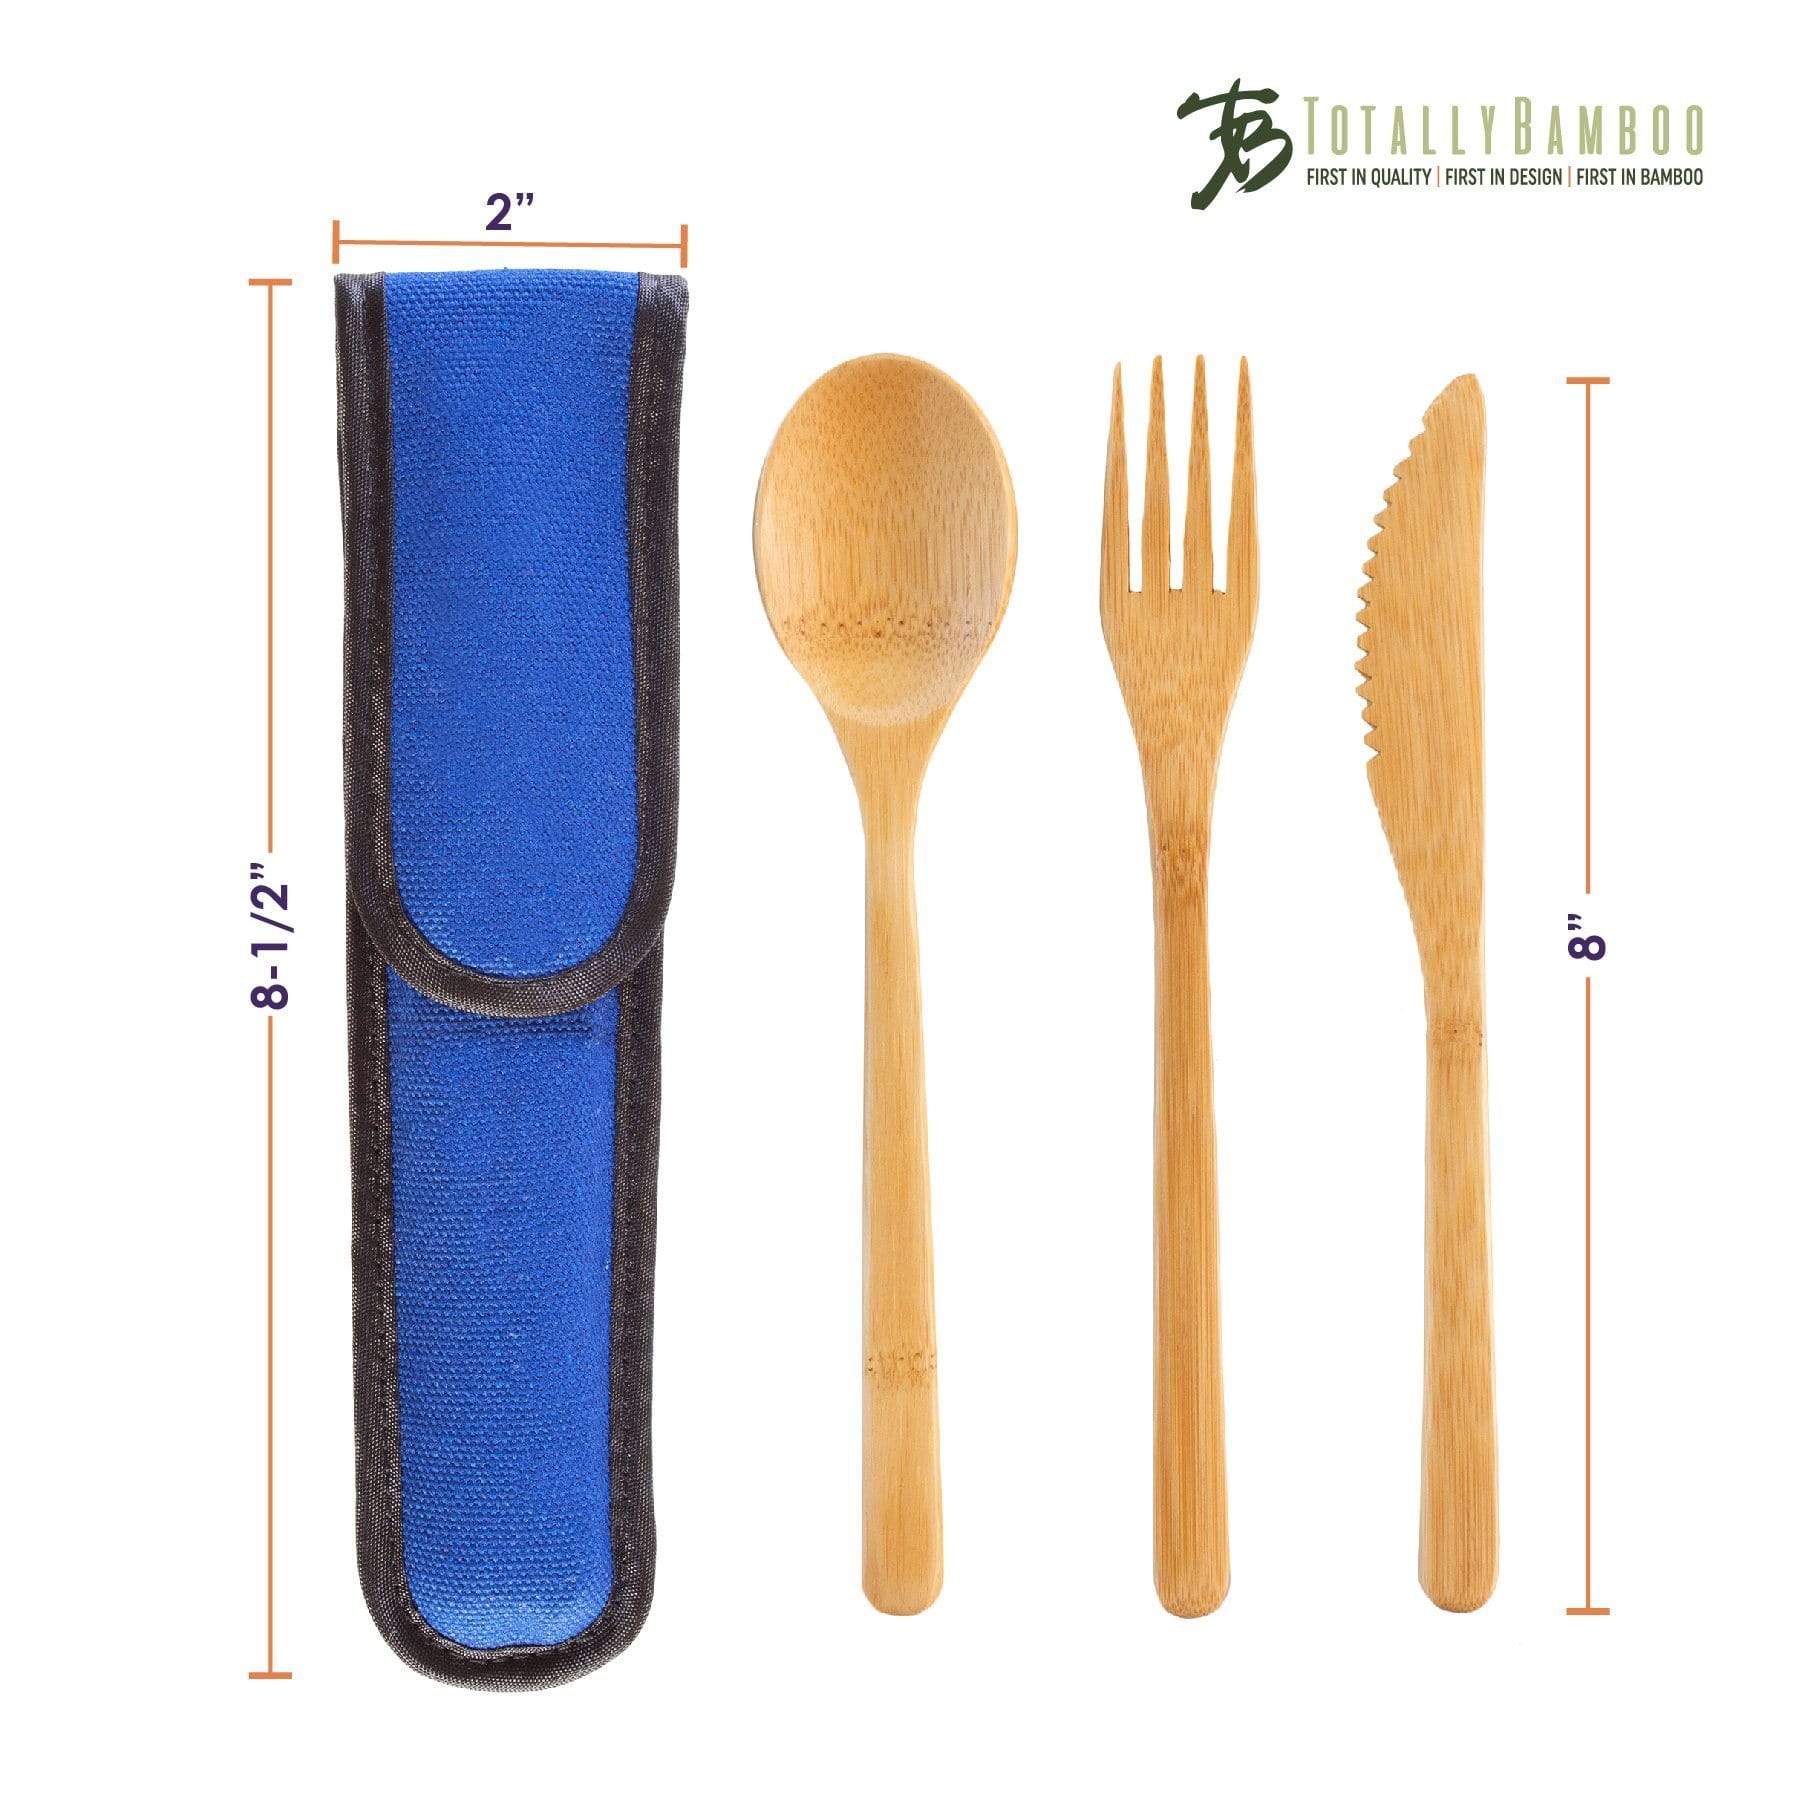 https://totallybamboo.com/cdn/shop/products/totally-bamboo-take-along-reusable-utensil-set-with-blue-travel-case-includes-bamboo-spoon-fork-knife-dishwasher-safe-totally-bamboo-554903.jpg?v=1627999100